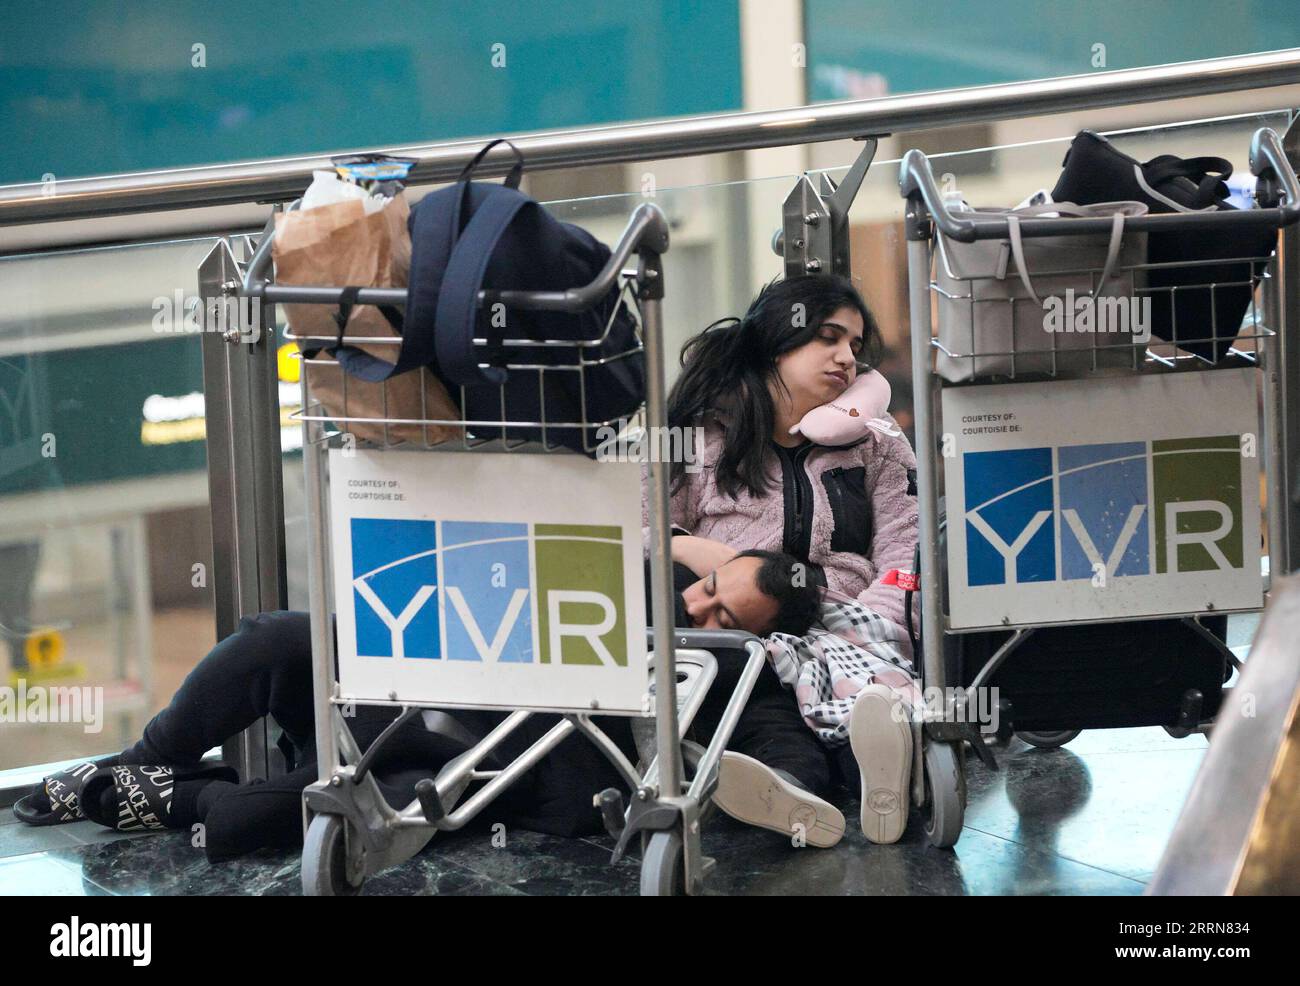 221220 -- RICHMOND CANADA, Dec. 20, 2022 -- People sleep on the floor at Vancouver International Airport in Richmond, British Columbia, Canada, on Dec. 20, 2022. Thousands of travelers were stuck at the Vancouver International Airport on Tuesday as many flights were cancelled or delayed due to the snowstorm. Photo by /Xinhua CANADA-VANCOUVER INTERNATIONAL AIRPORT-SNOWSTORM-STRANDED PASSENGERS LiangxSen PUBLICATIONxNOTxINxCHN Stock Photo